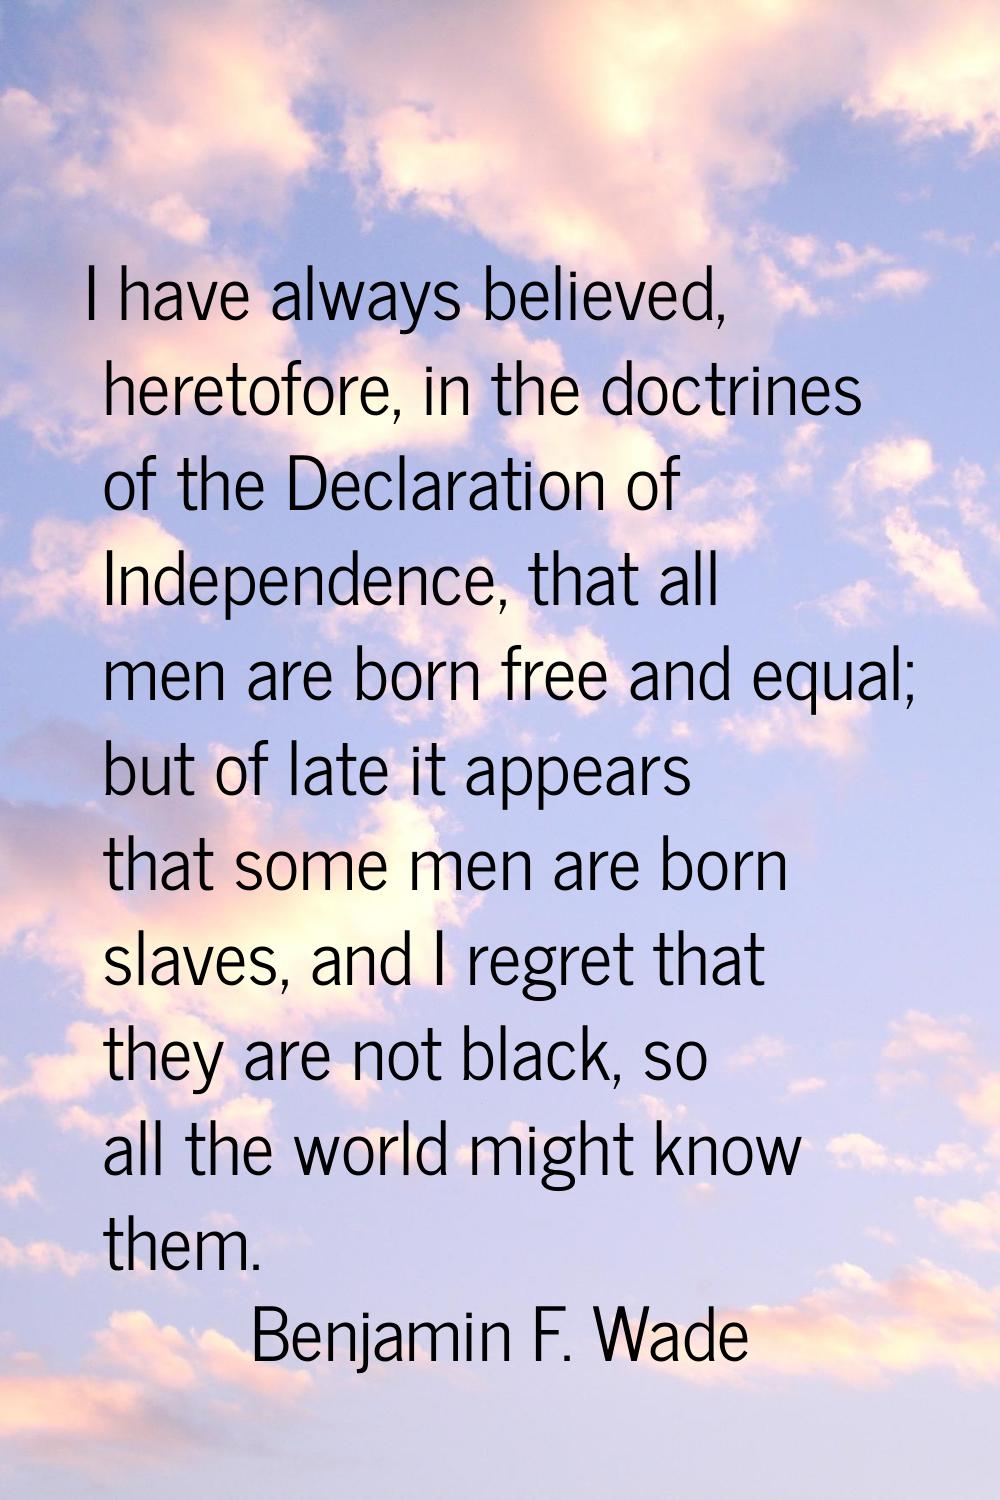 I have always believed, heretofore, in the doctrines of the Declaration of Independence, that all m